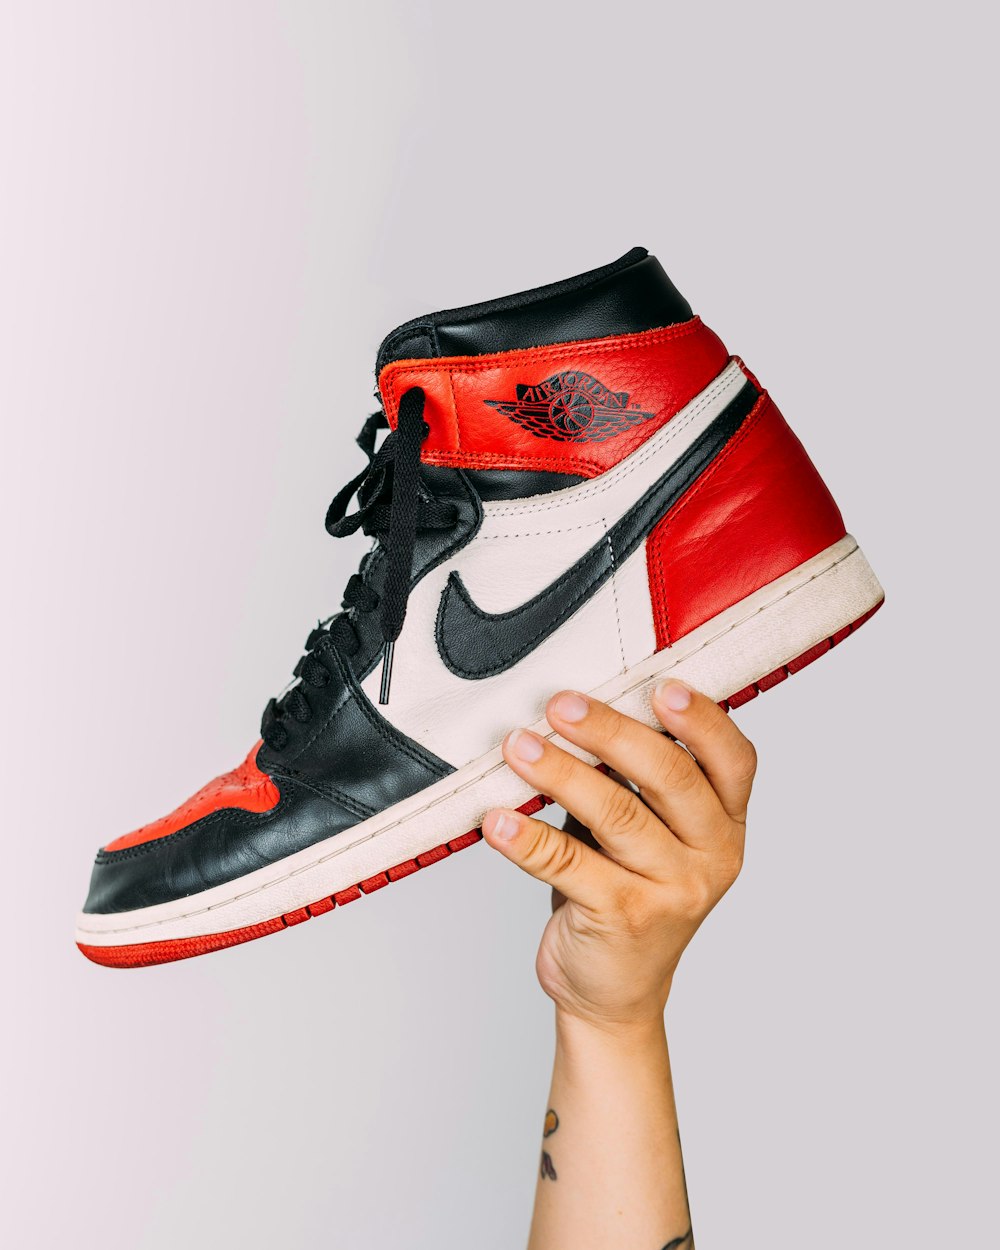 person holding red and white nike air jordan 1 shoe